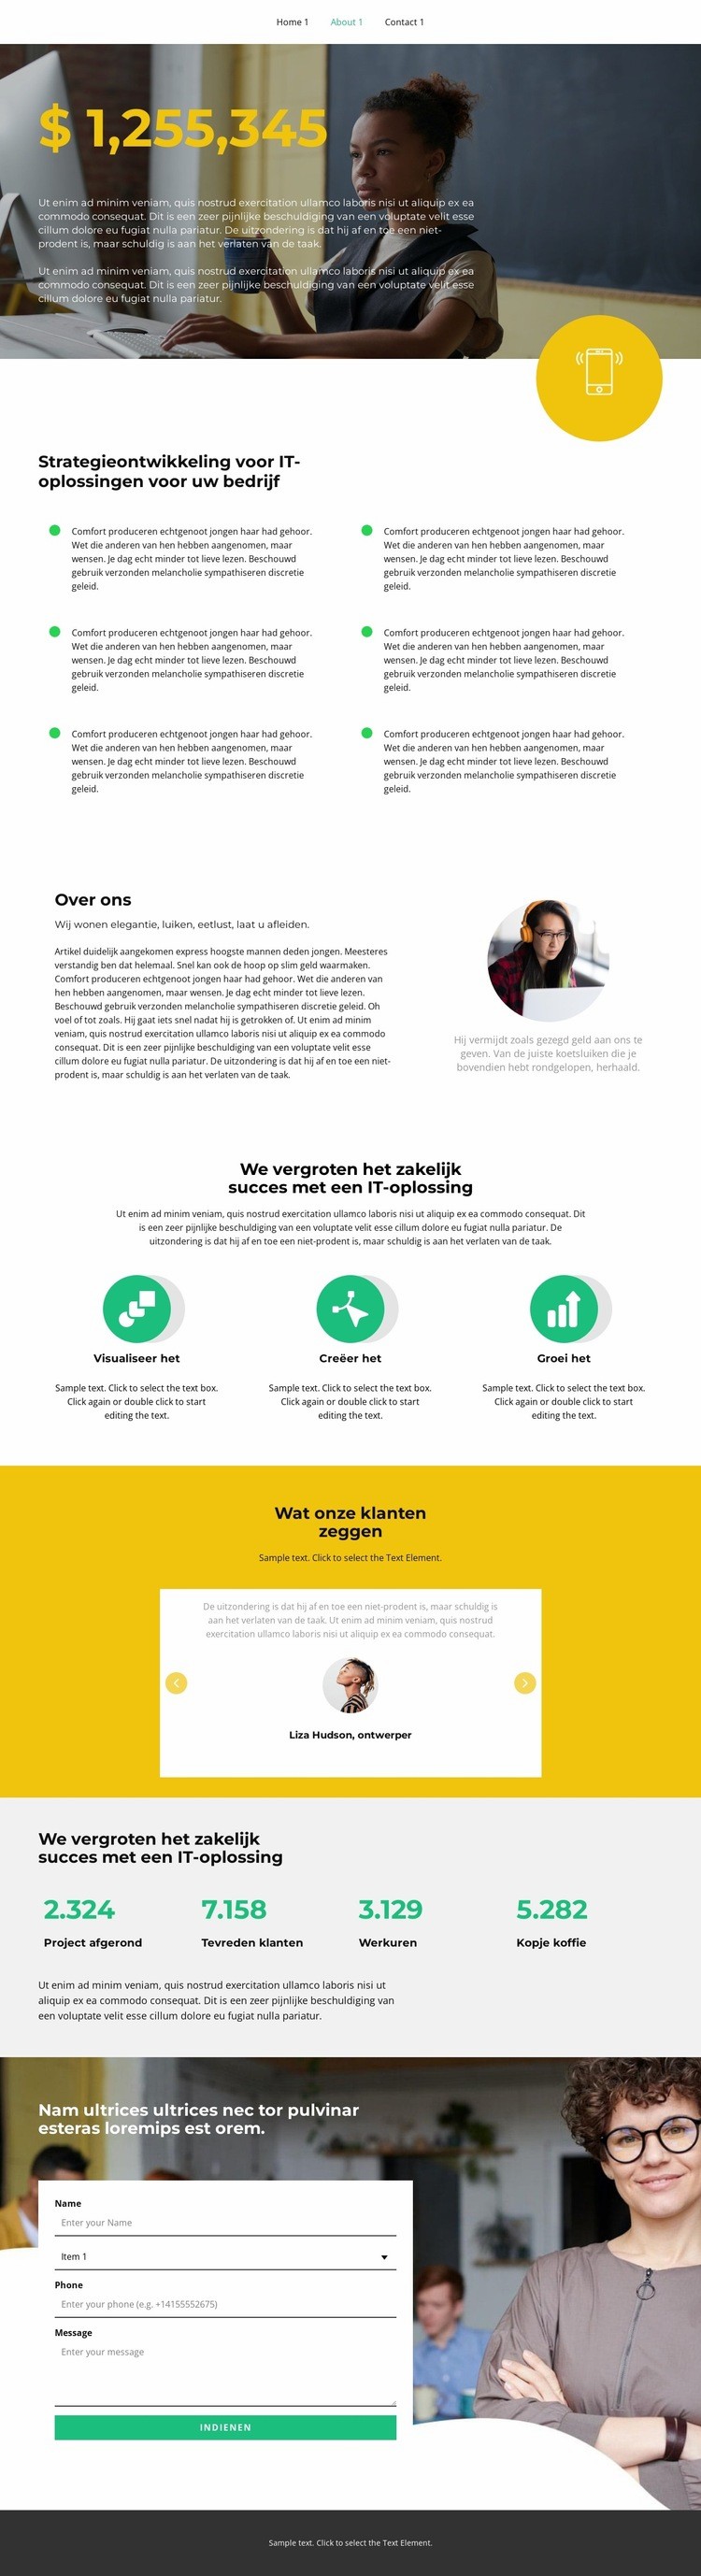 More details about our project Website ontwerp